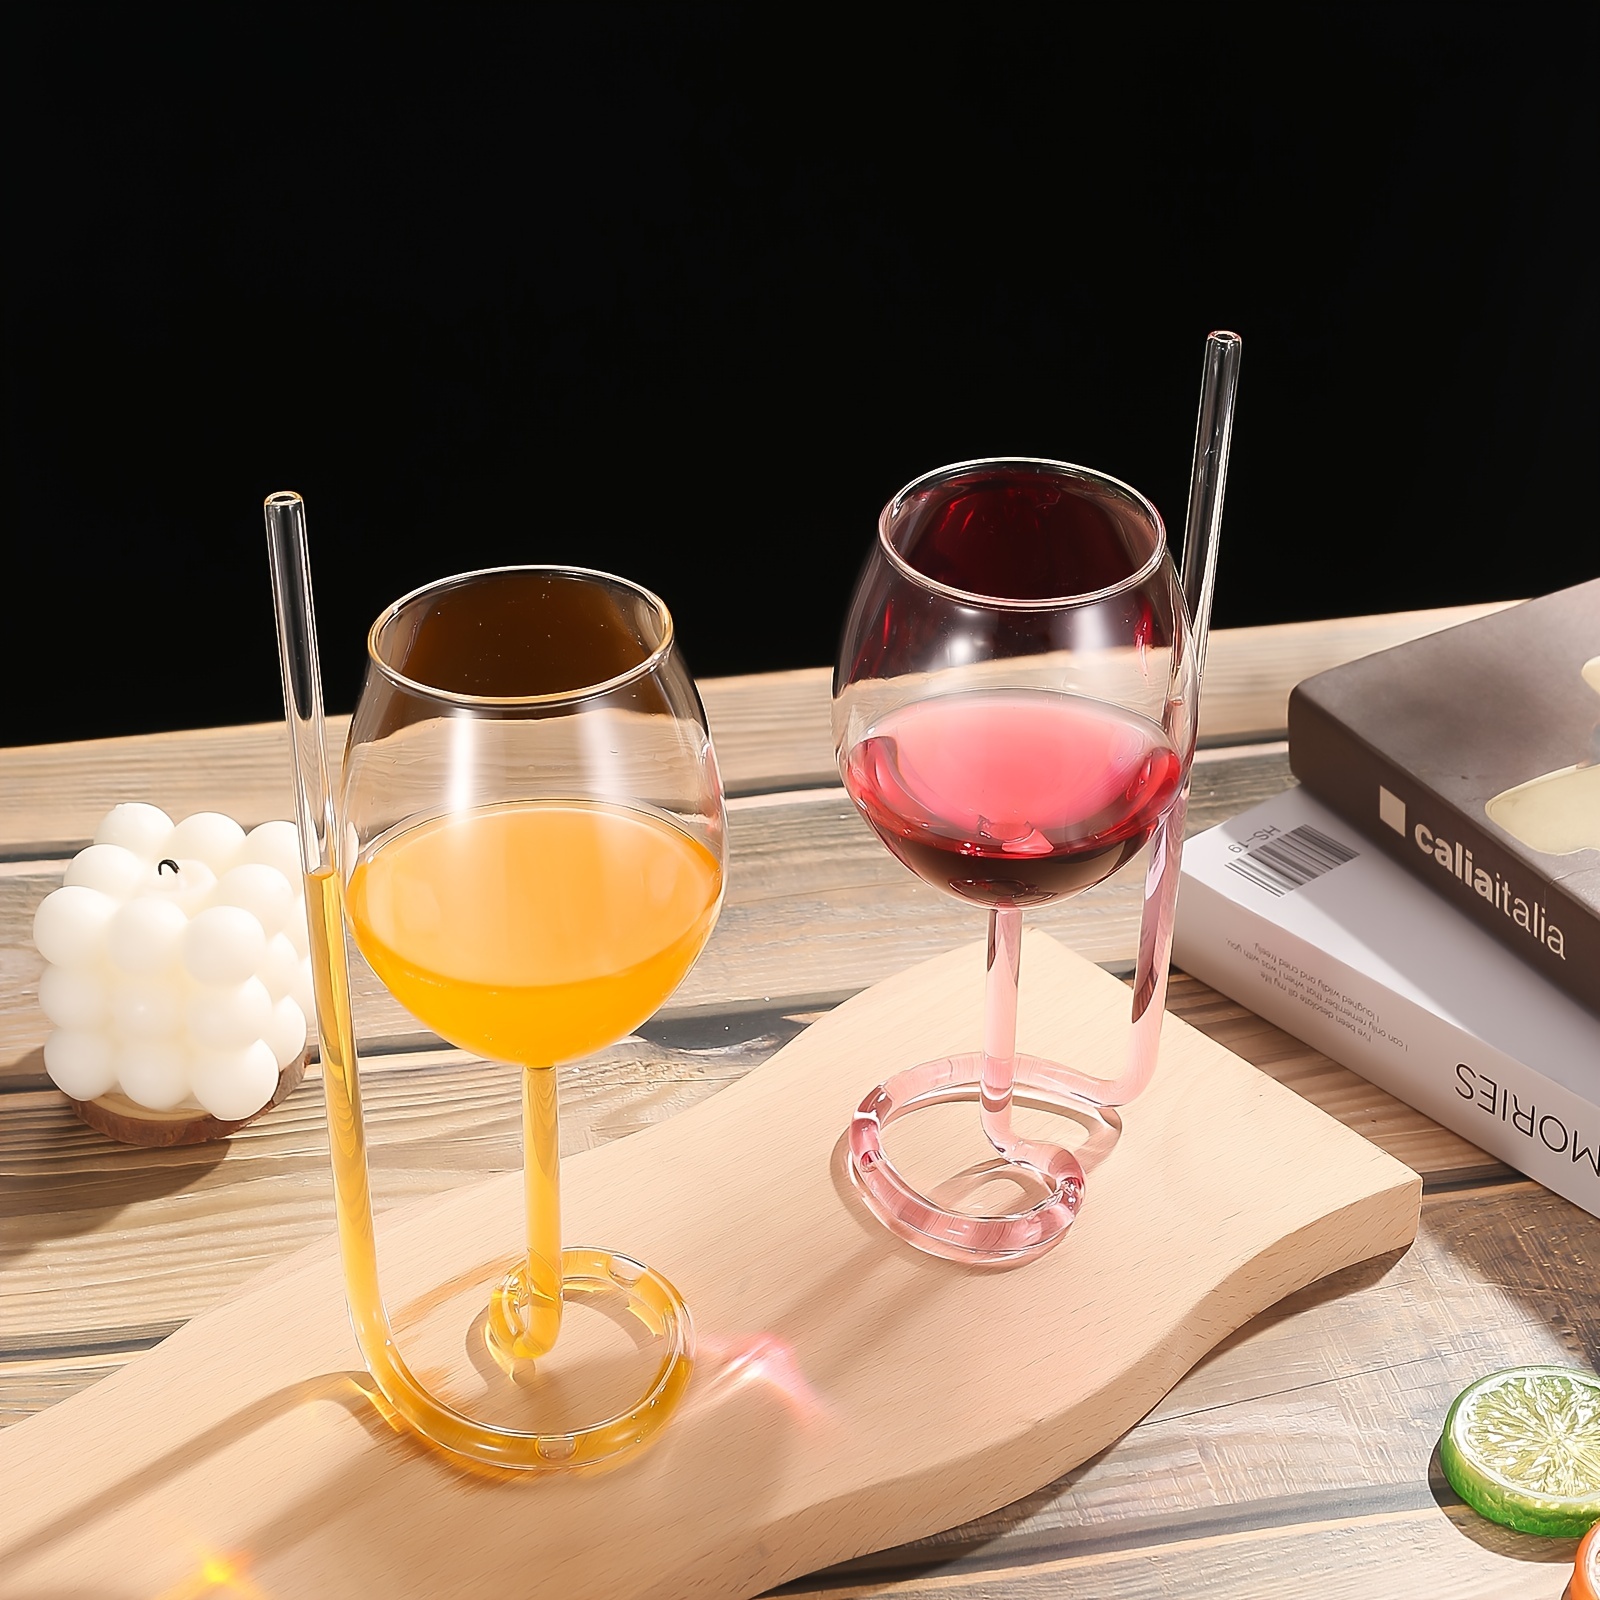 Glassware with Built in Straw